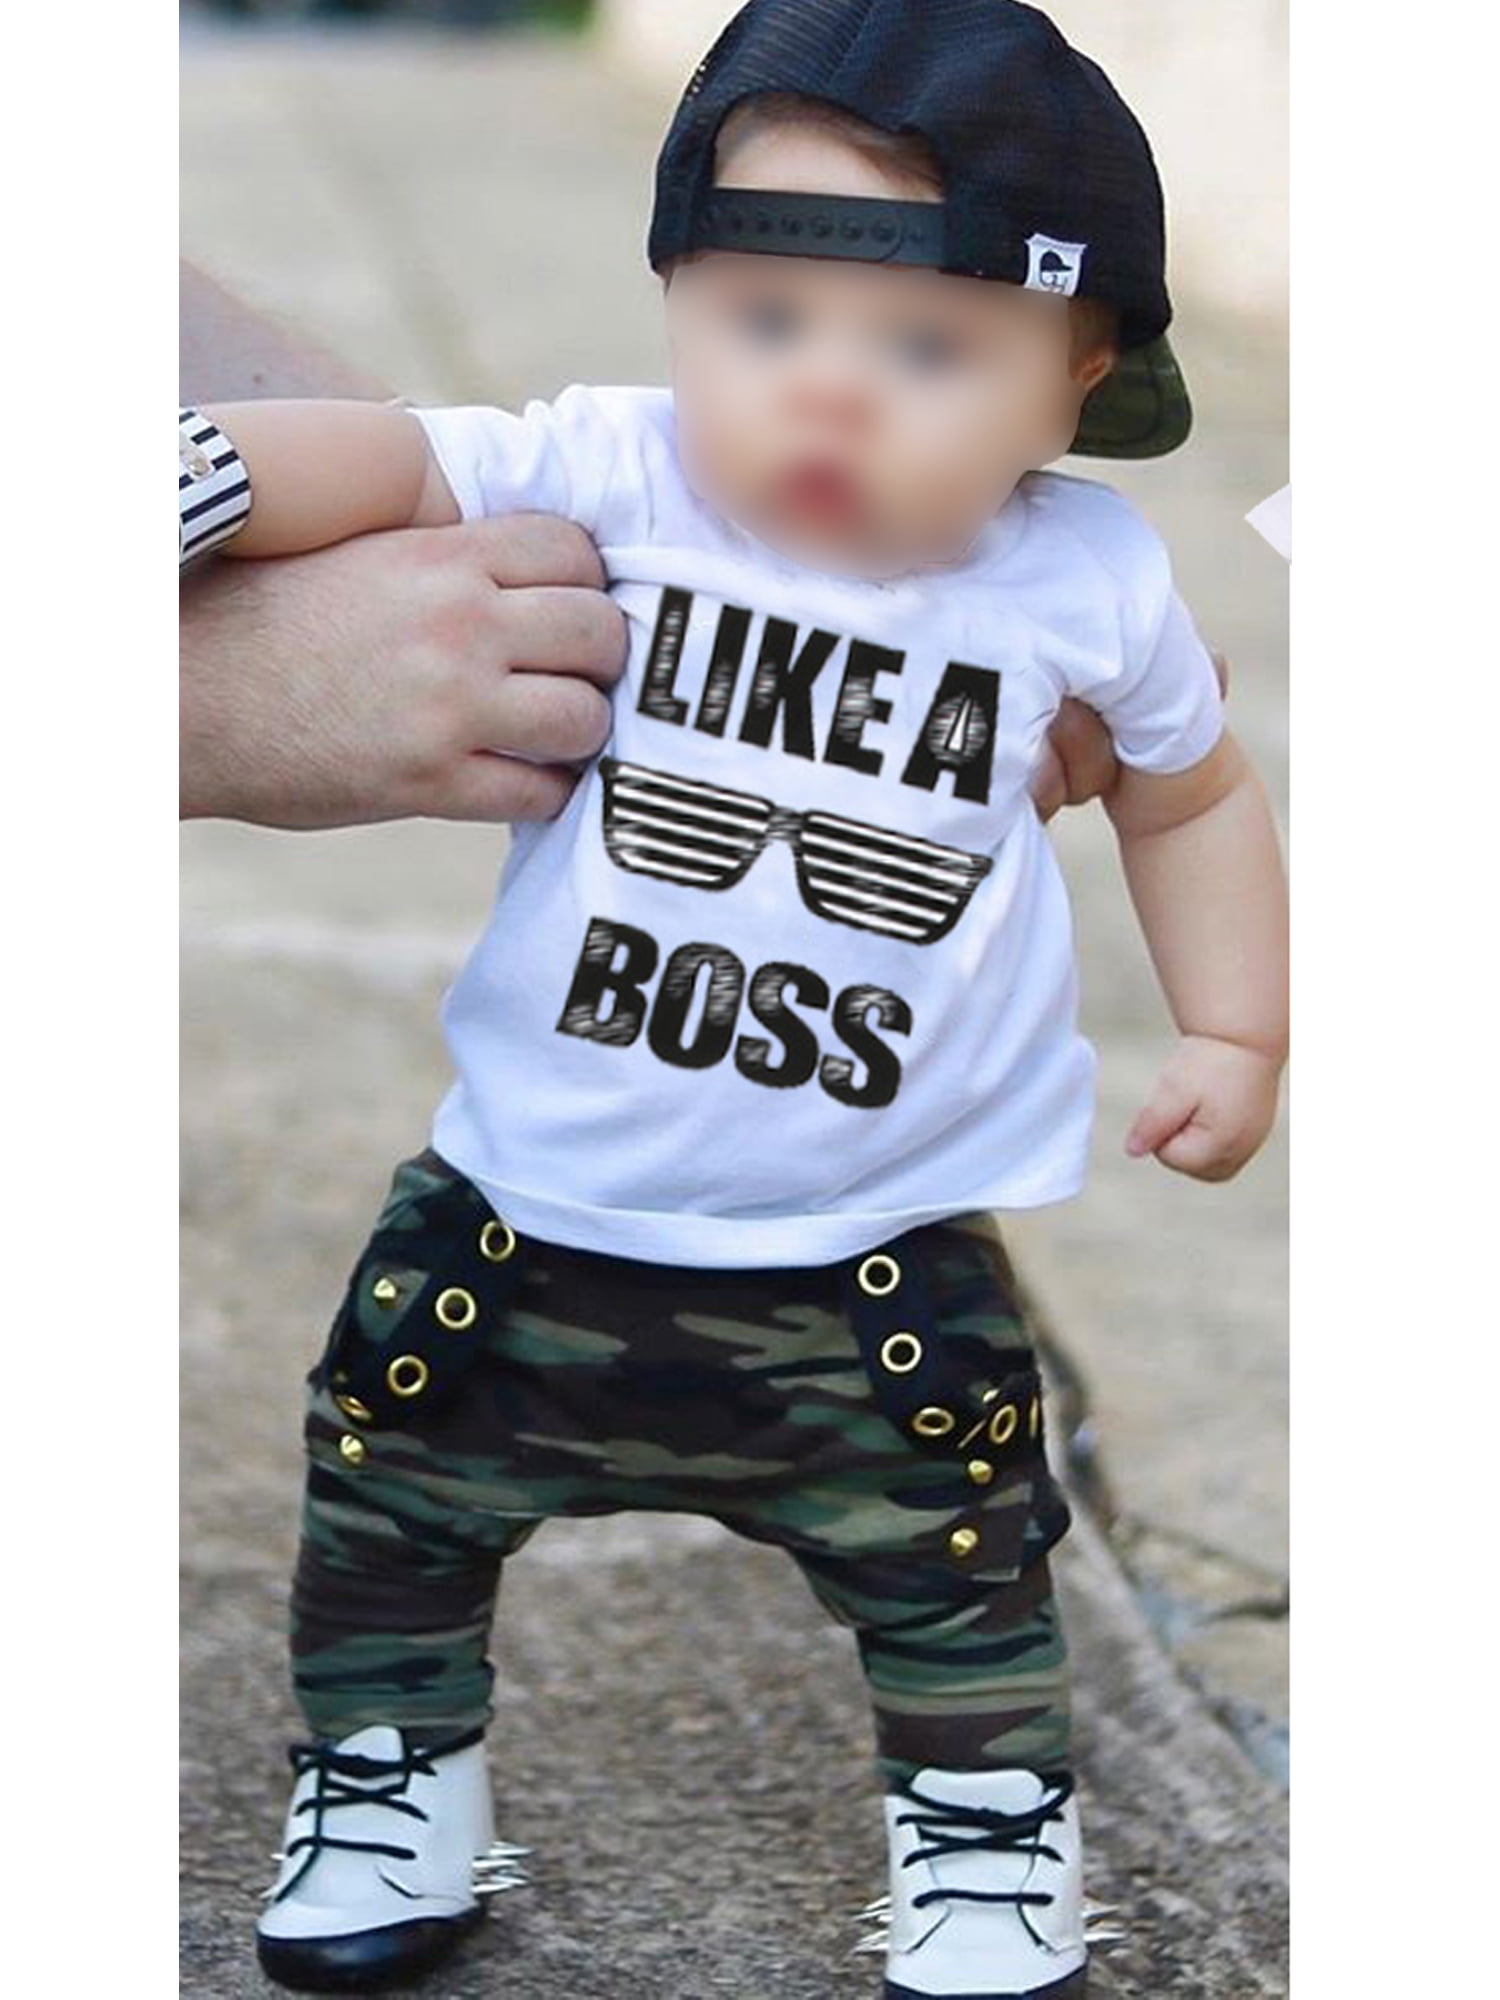 UK Newborn Infant Baby Fish Boy Toddler T-shirt Tops+Pants Outfit Clothes Sets 